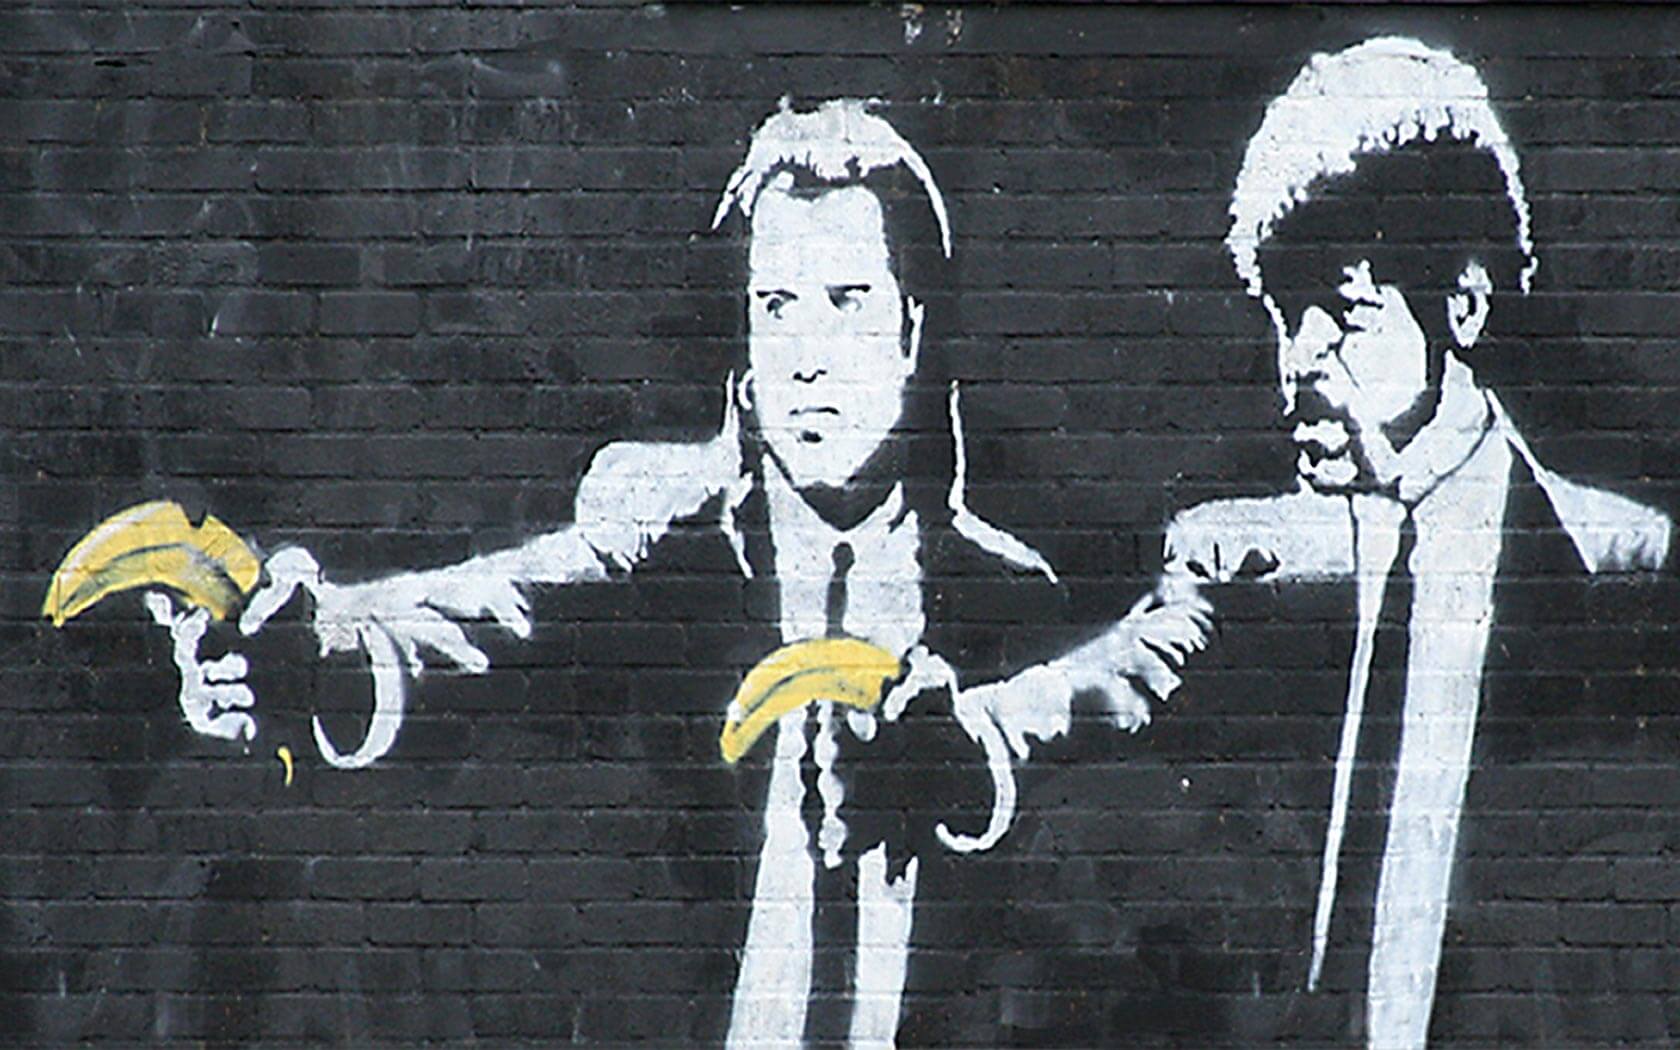 The meaning behind Banksy's 'Pulp Fiction' - Explained